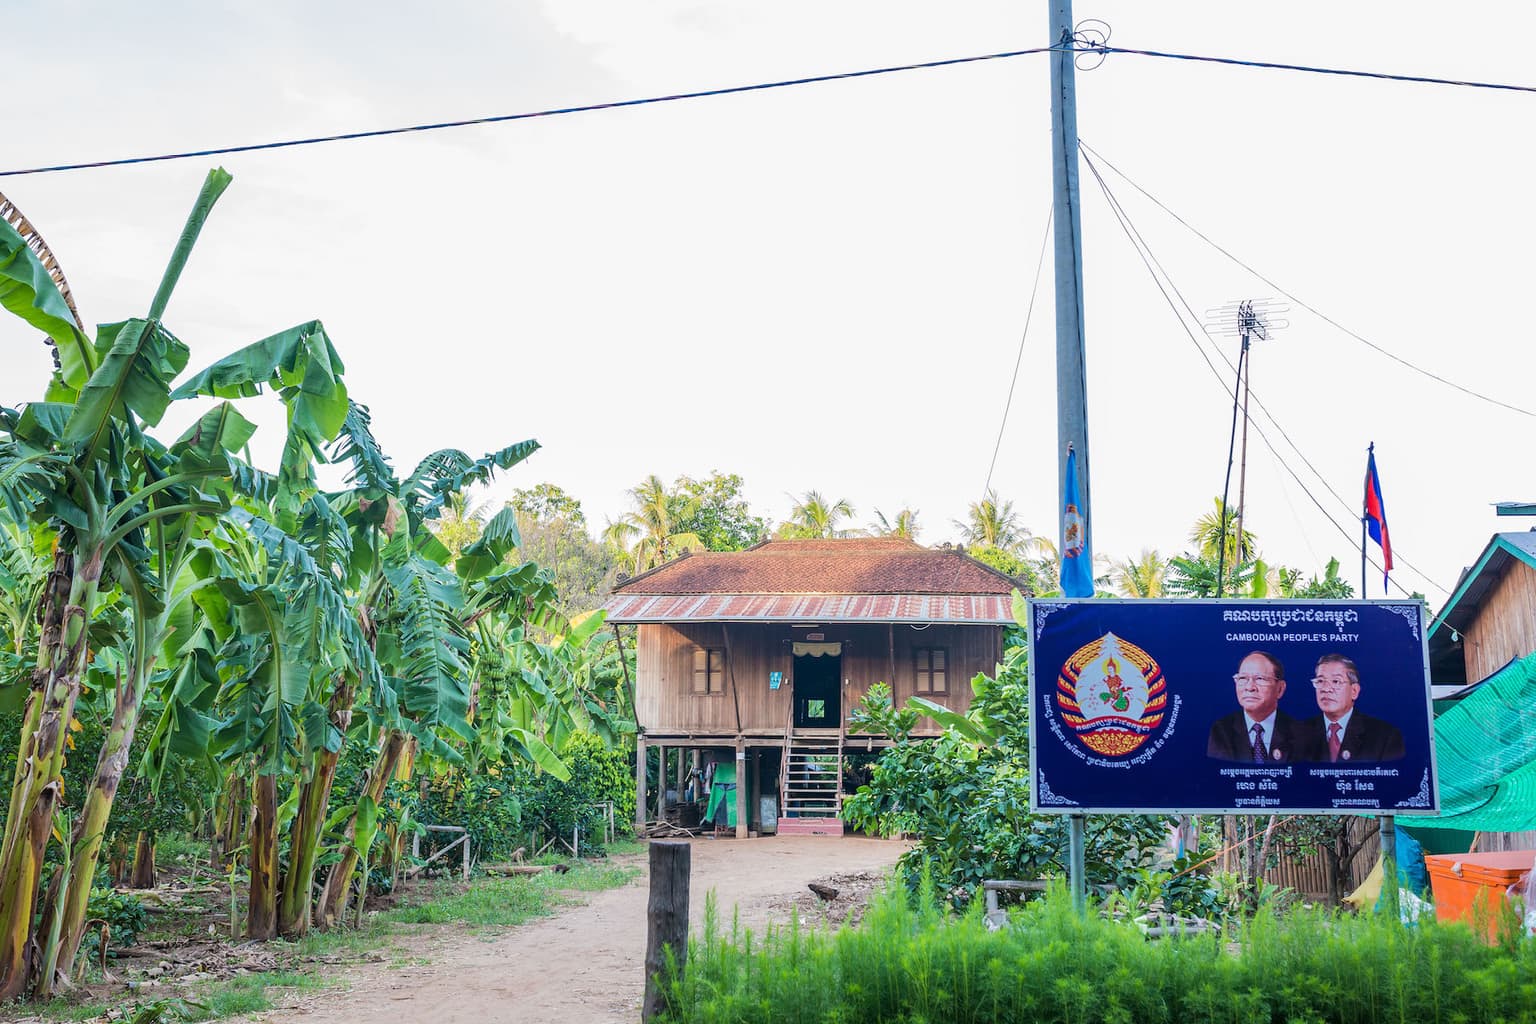 Signs of the leading party are everywhere, one of the interesting facts about Cambodia